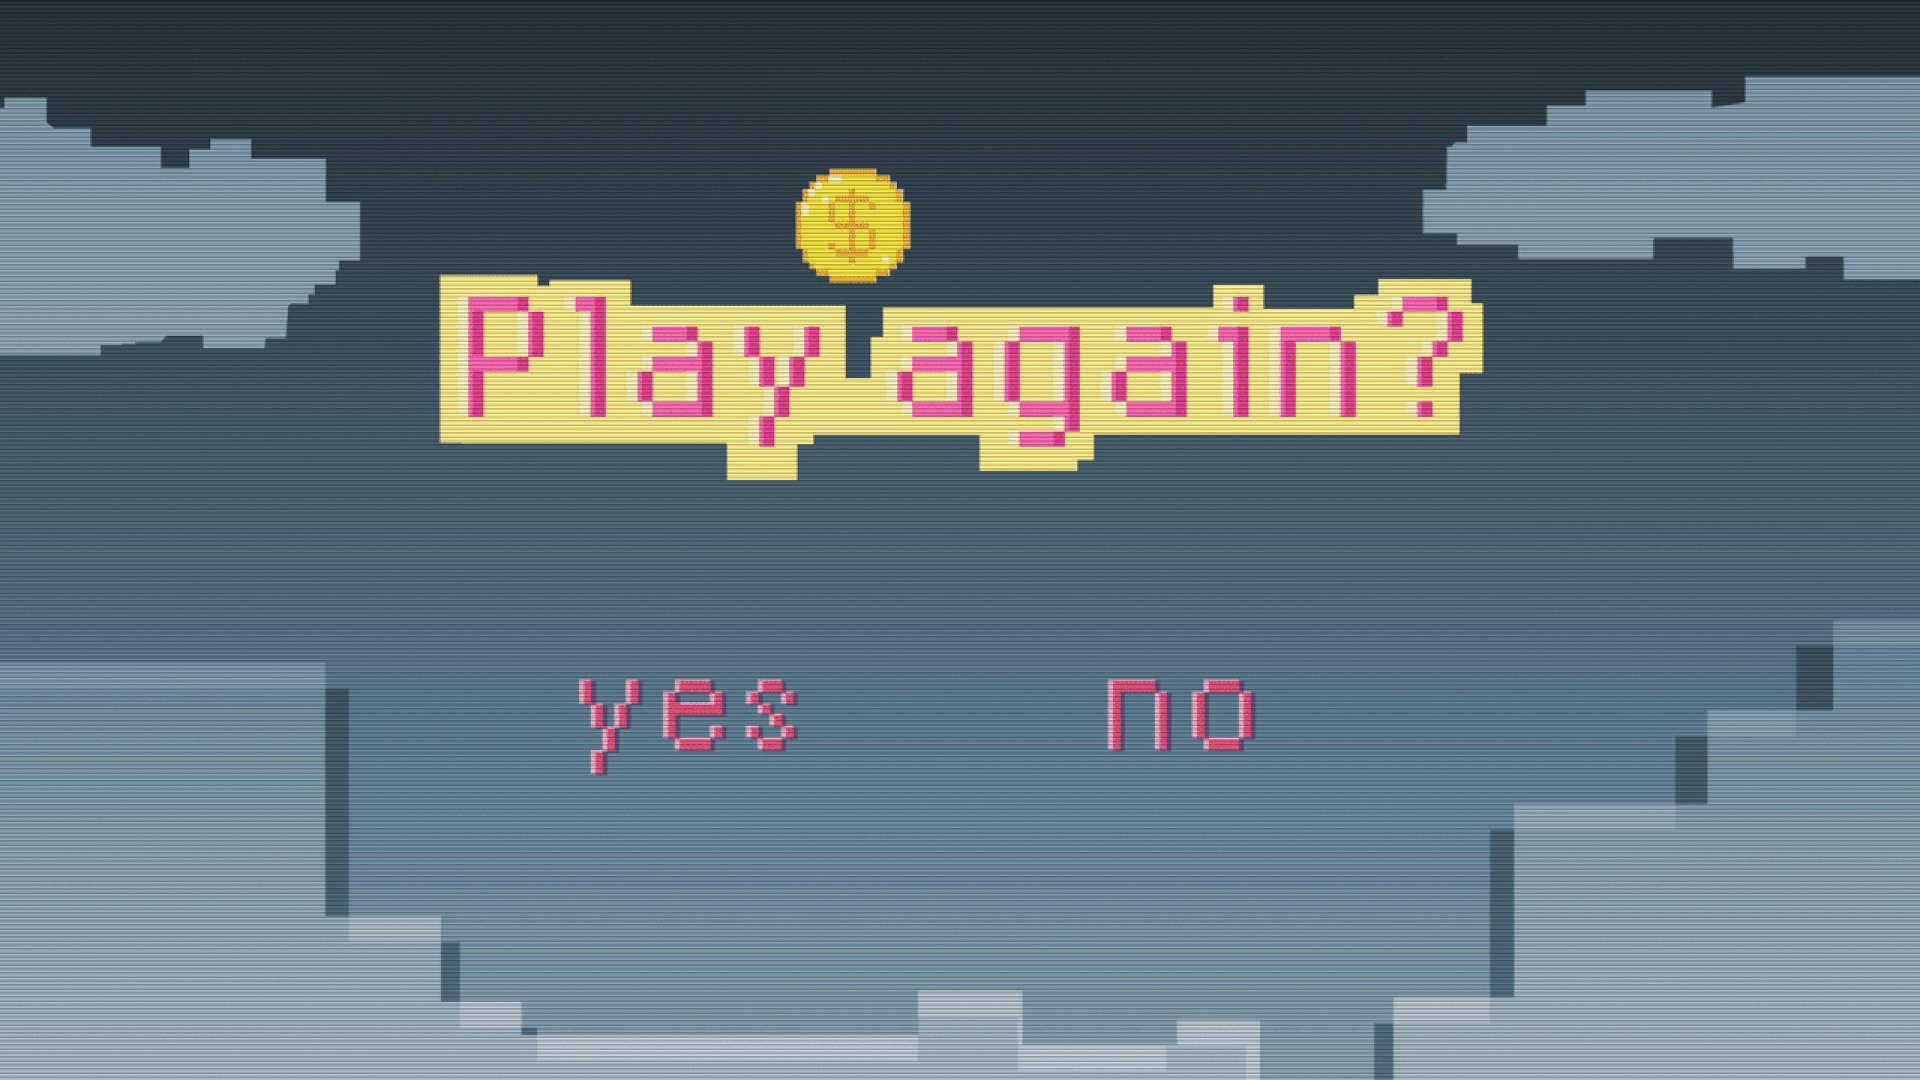 Animated illustrated of a video game screen prompting the player to play again, with a coin cursor scrolling over "yes" and "no" 